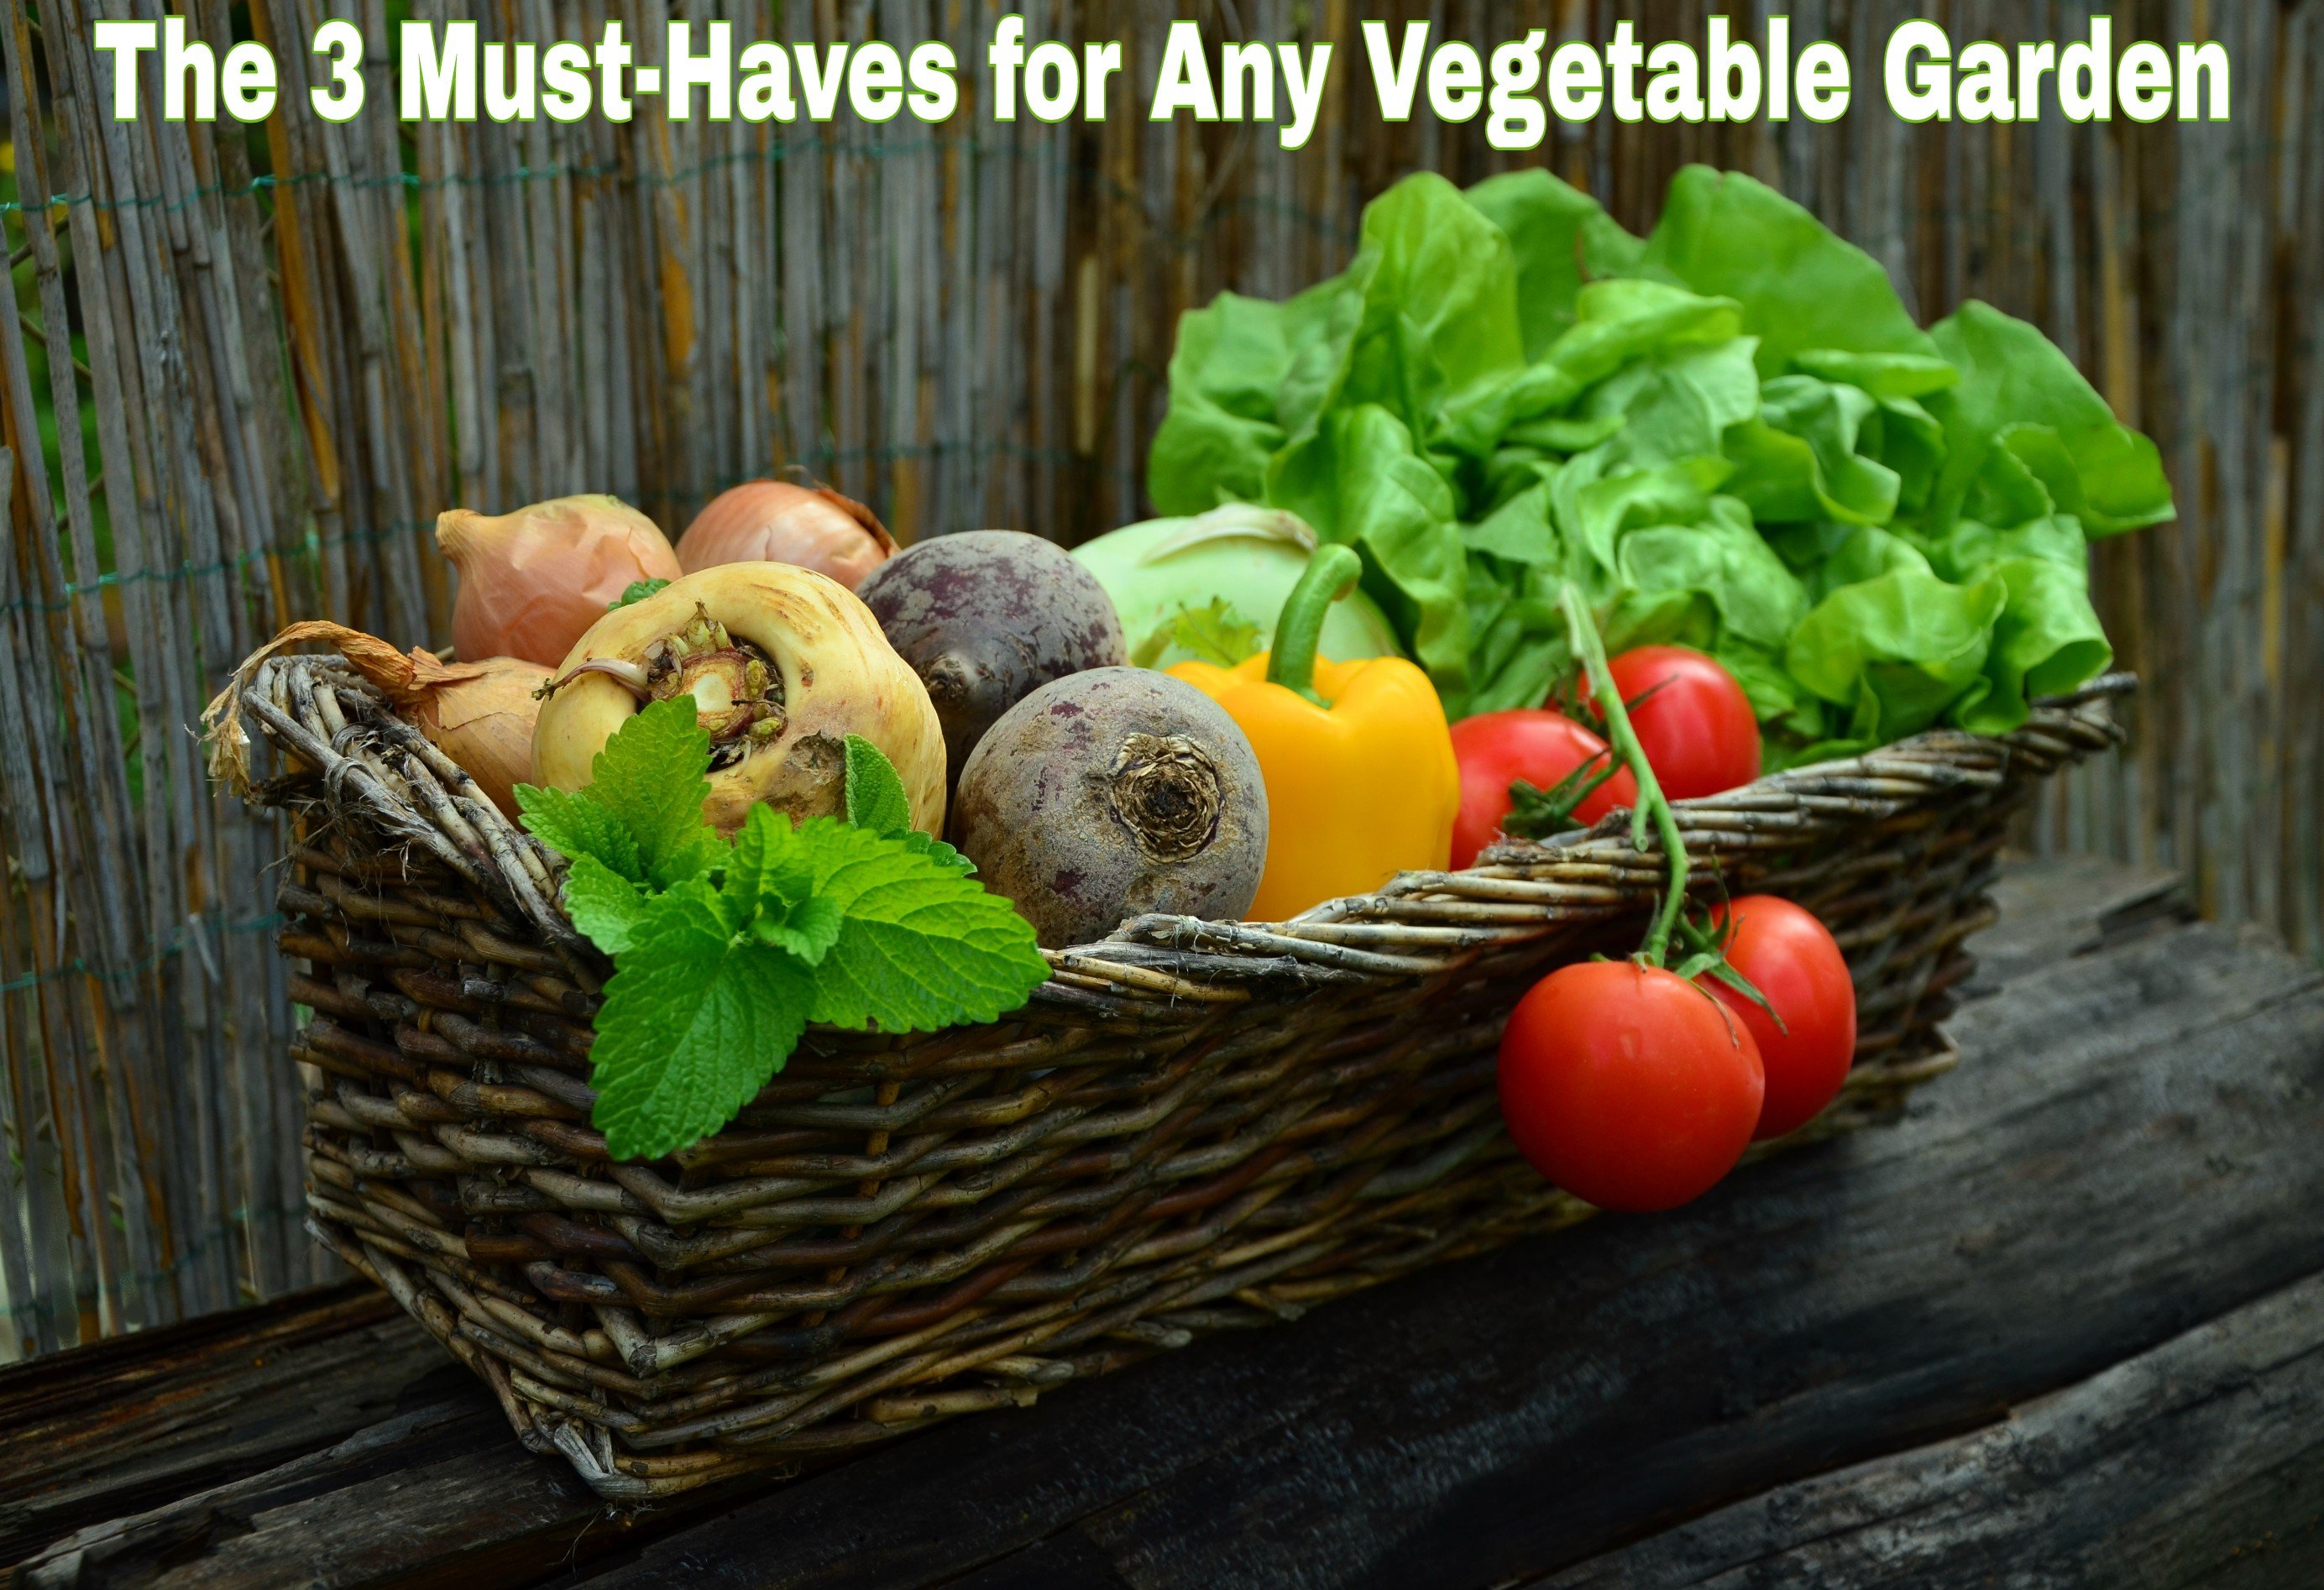 The 3 Must-Haves for Any Vegetable Garden title with a picture of delicious fresh vegetables in a basket.